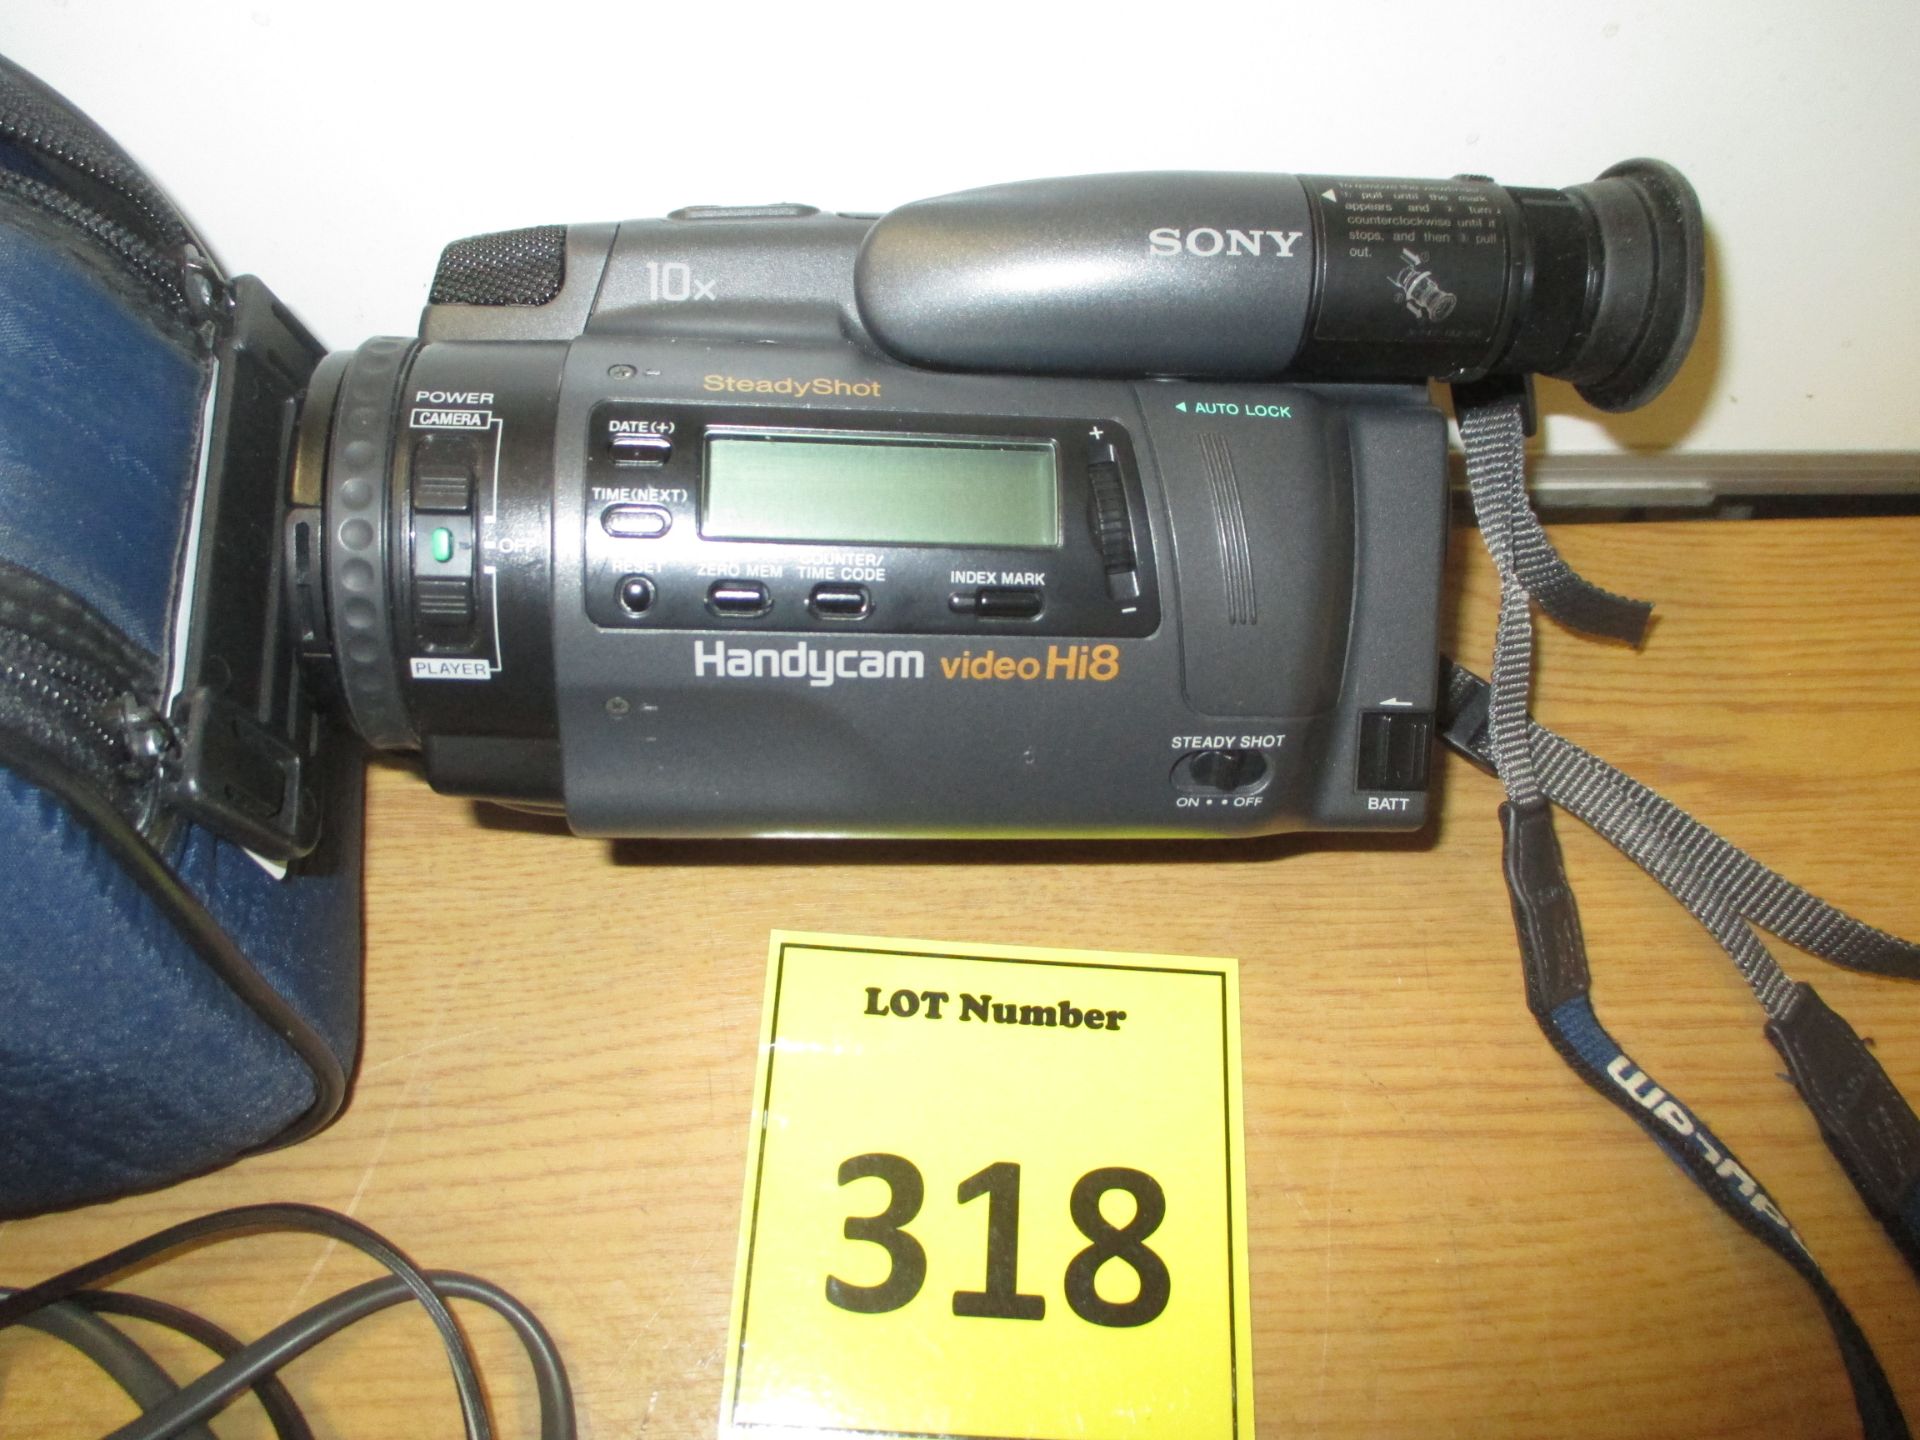 SONY HANDYCAM VIDEO HI8 MODEL MODEL CCD-TR2000E. COMPLETE WITH CHARGER, BATTERY REMOTE CONTROL & - Image 2 of 4